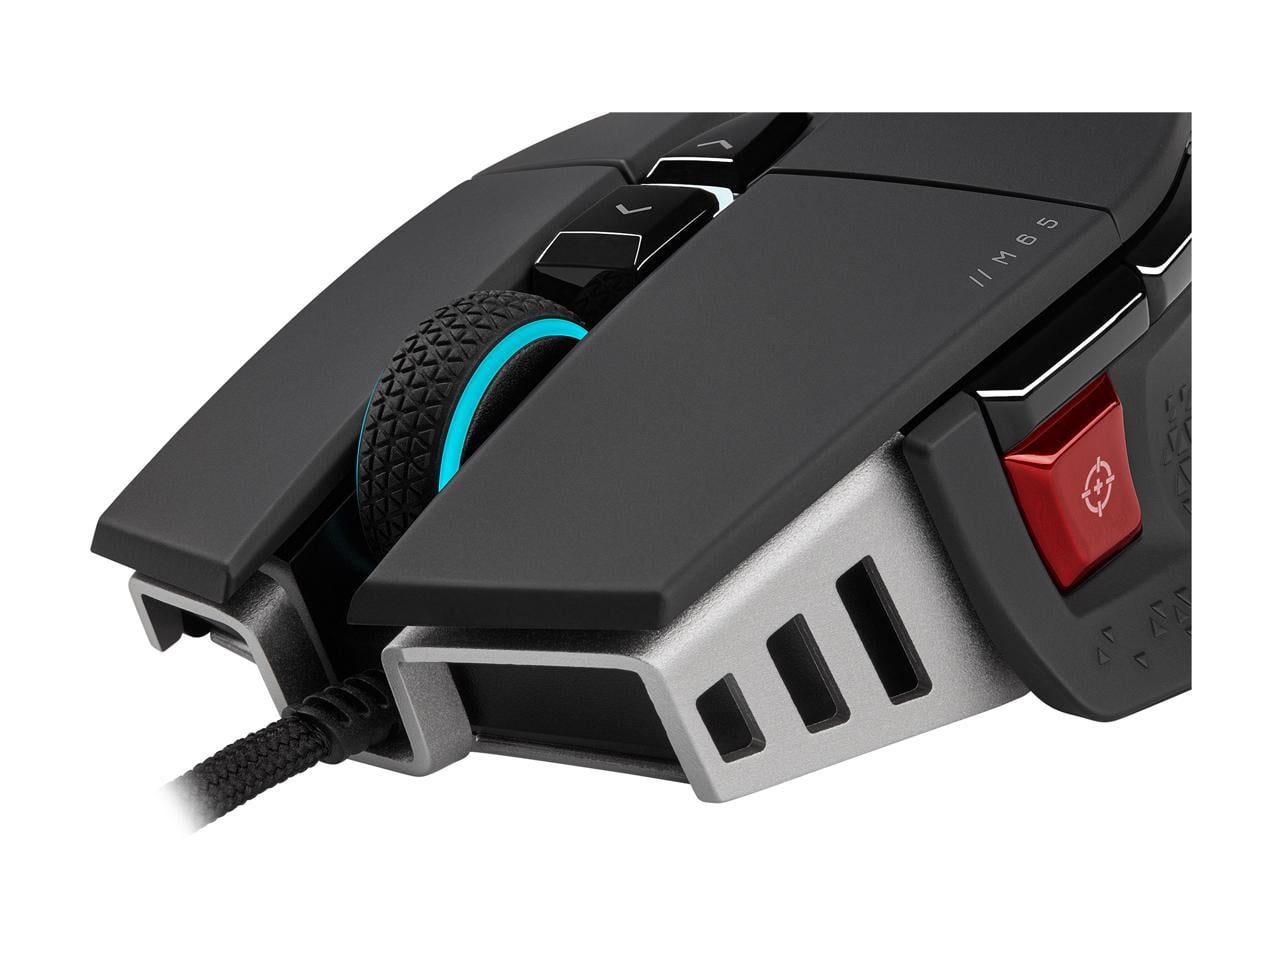 Corsair M65 RGB Ultra Tunable FPS Gaming Mouse Marksman 26,000 DPI Optical  Sensor, Optical Switches, AXON Hyper-Processing Technology, Sensor Fusion  Control, Tunable Weight System - Black | Kabelmäuse